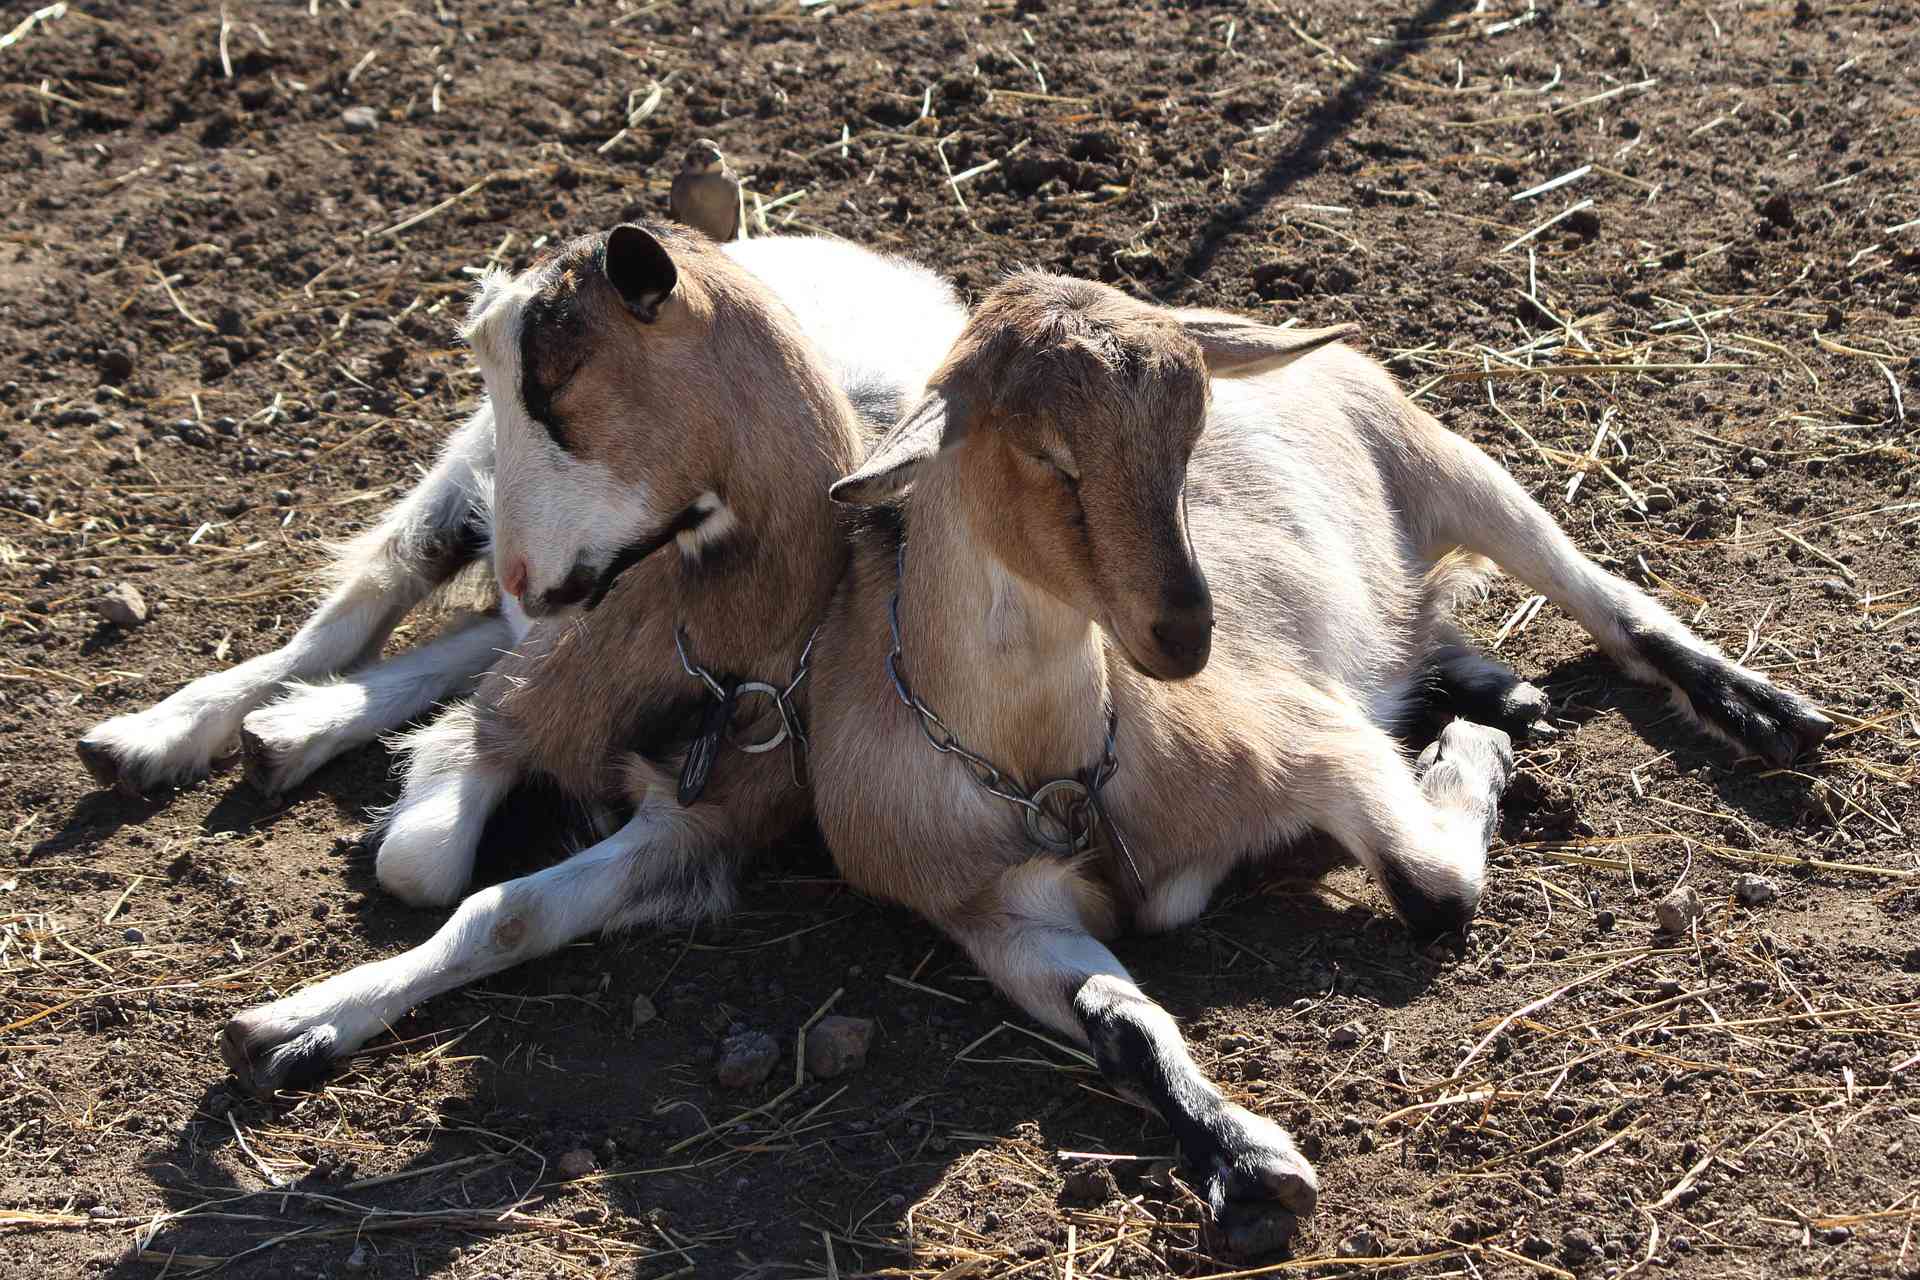 Two goats resting